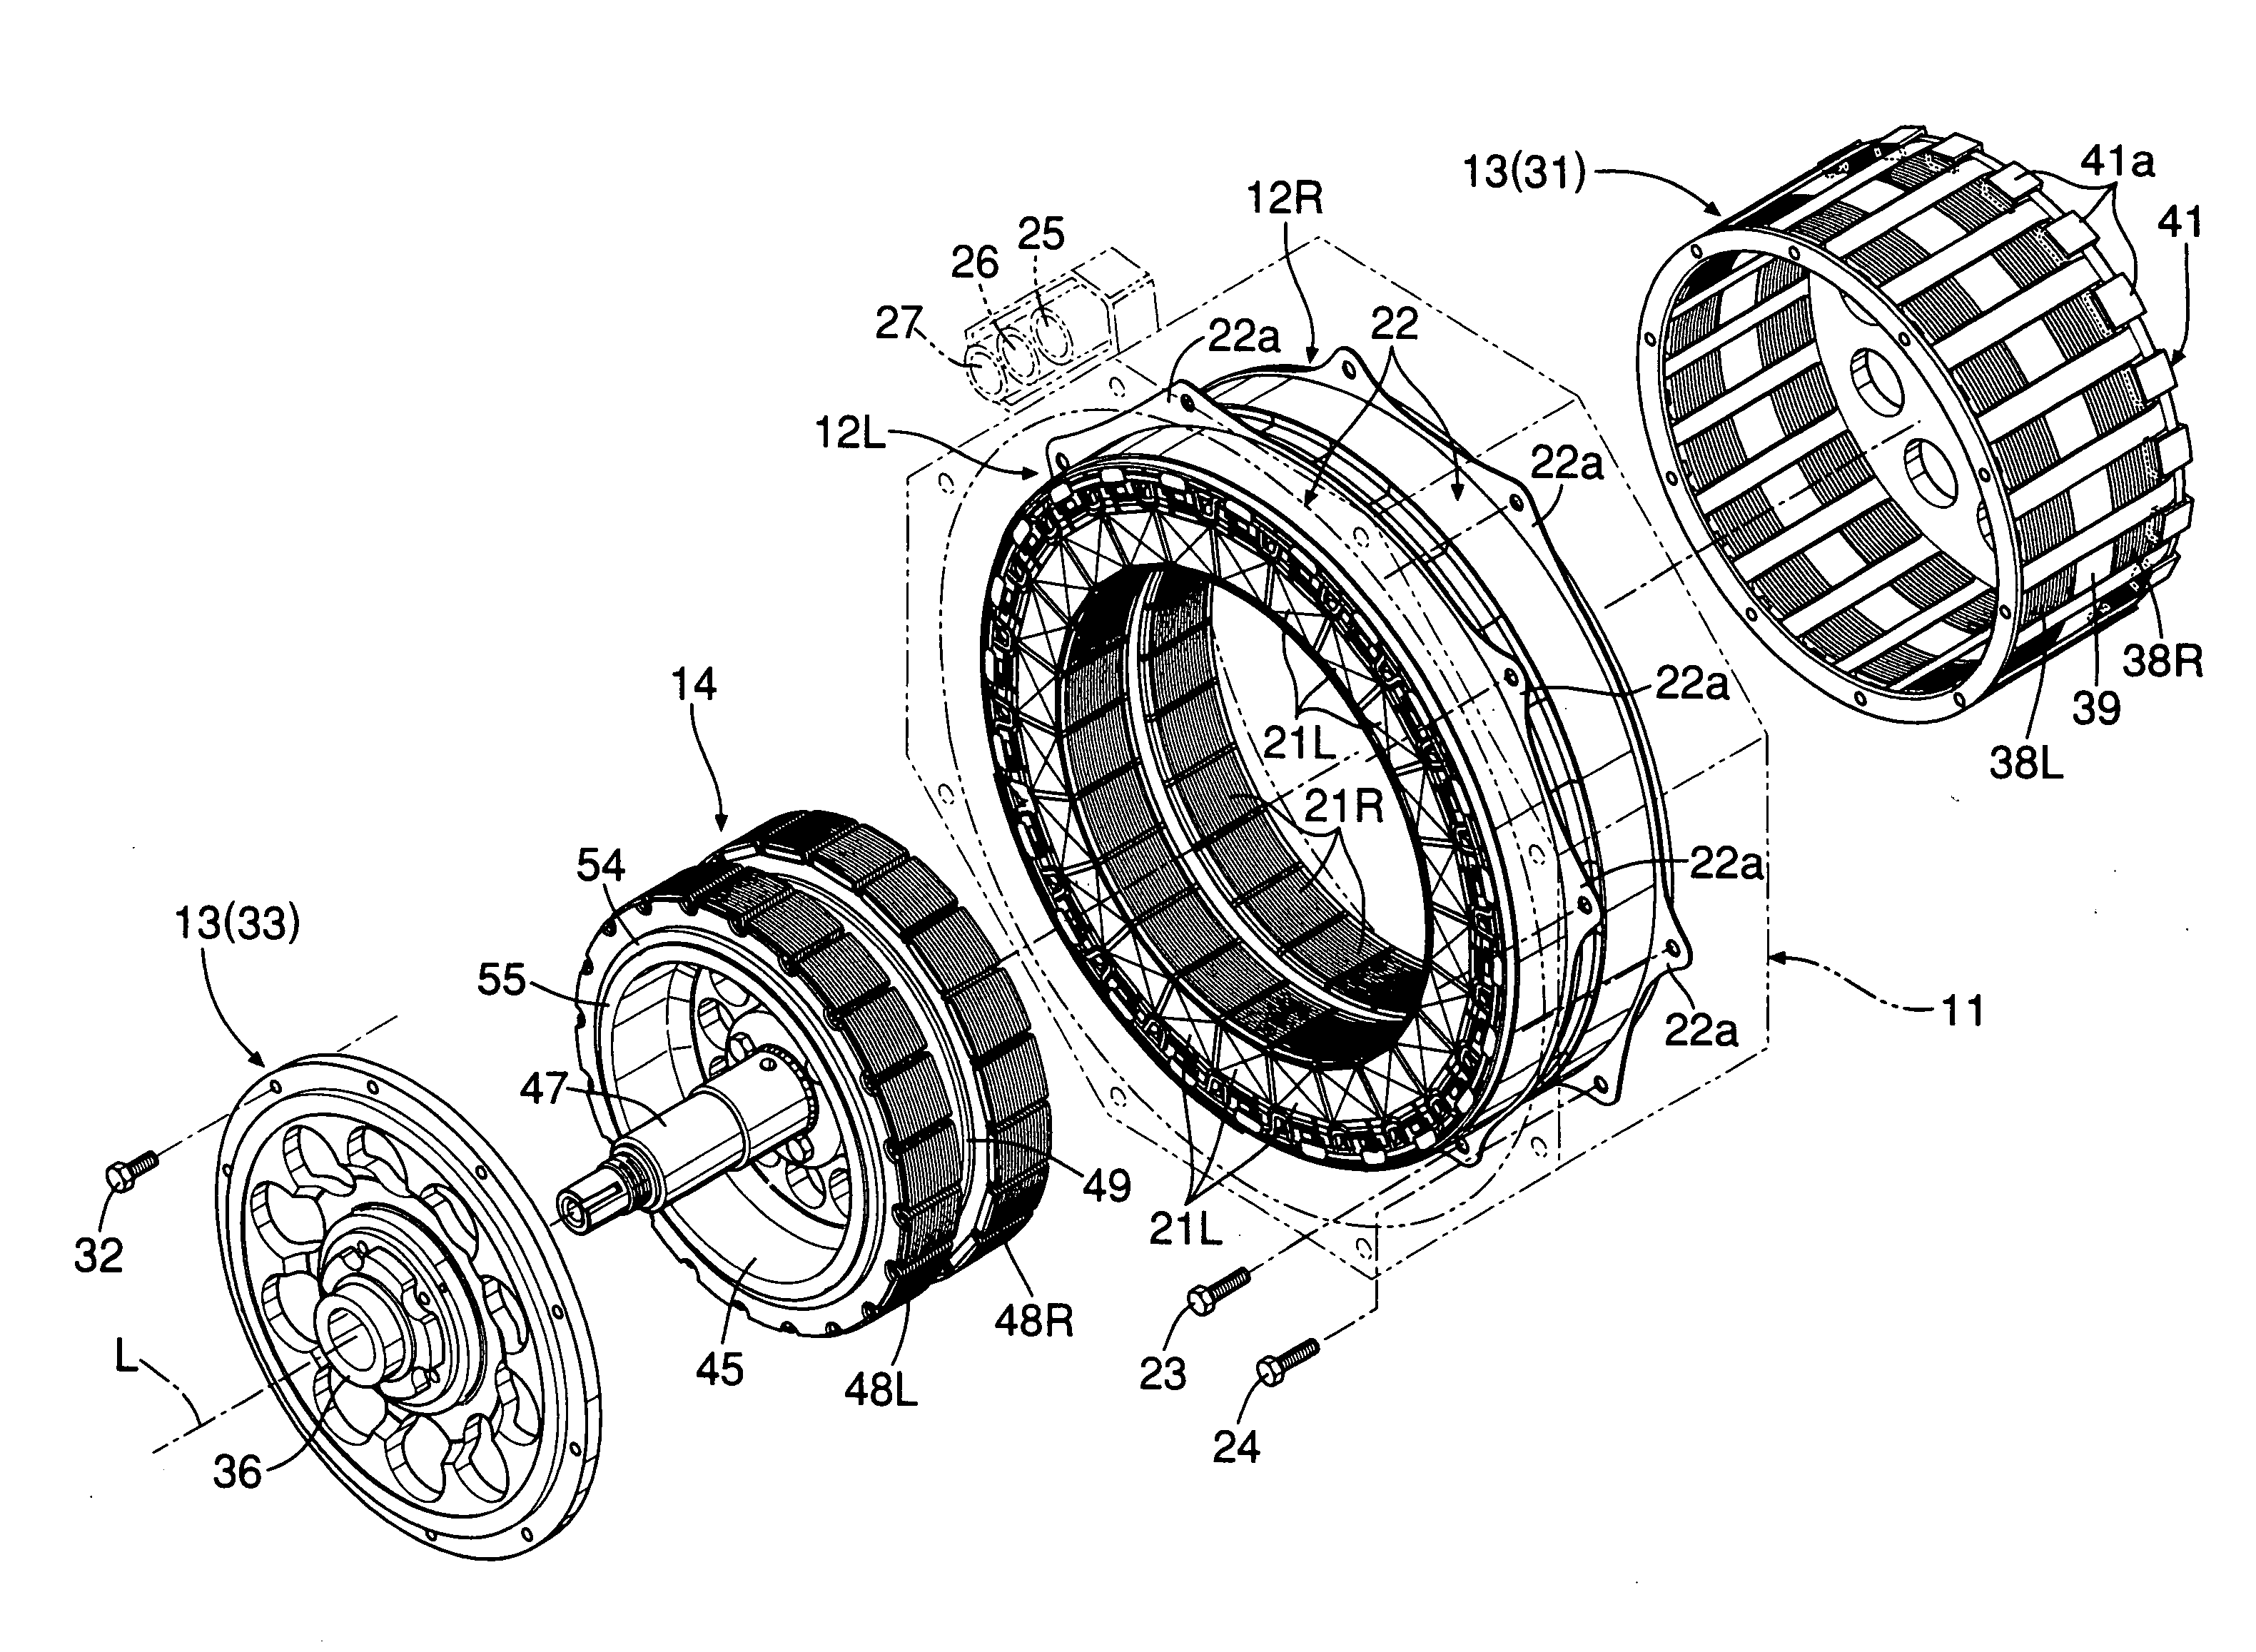 Motor, rotor structure and magnetic machine